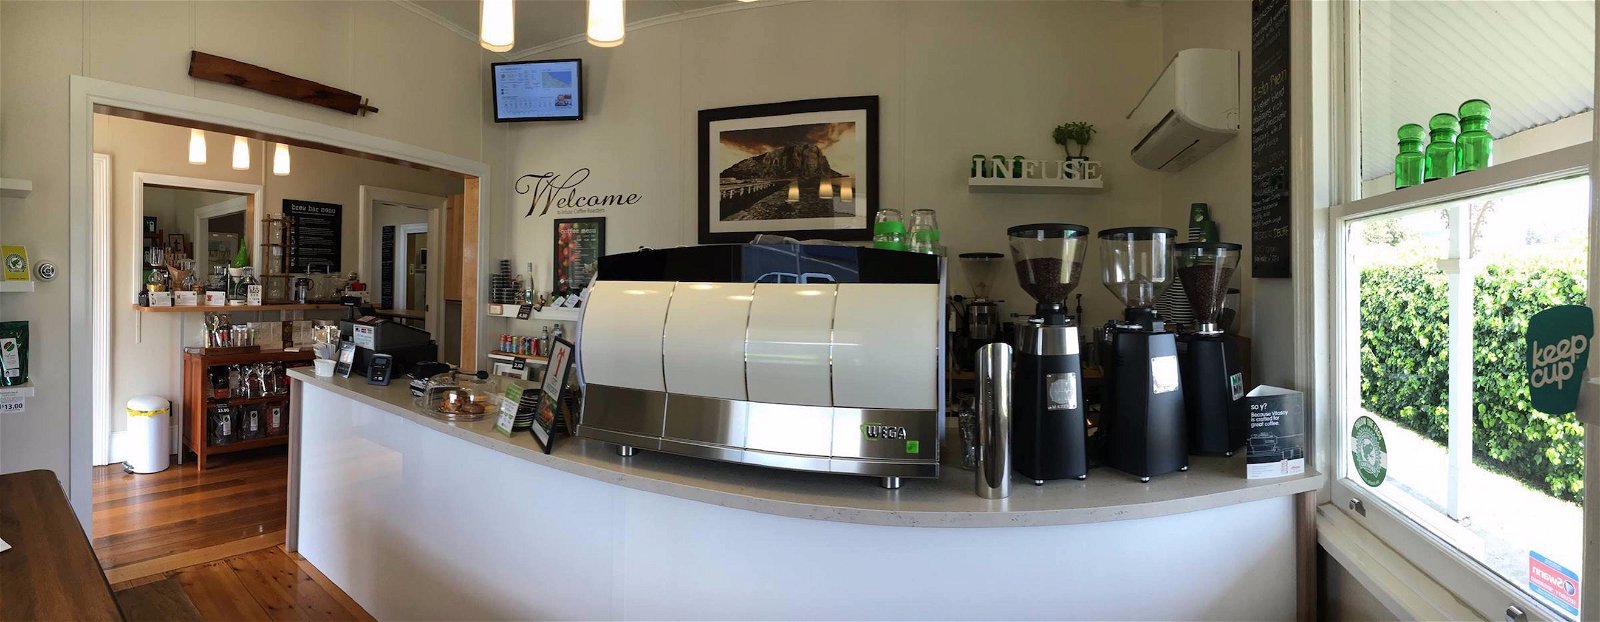 Infuse Coffee Roasters - Northern Rivers Accommodation